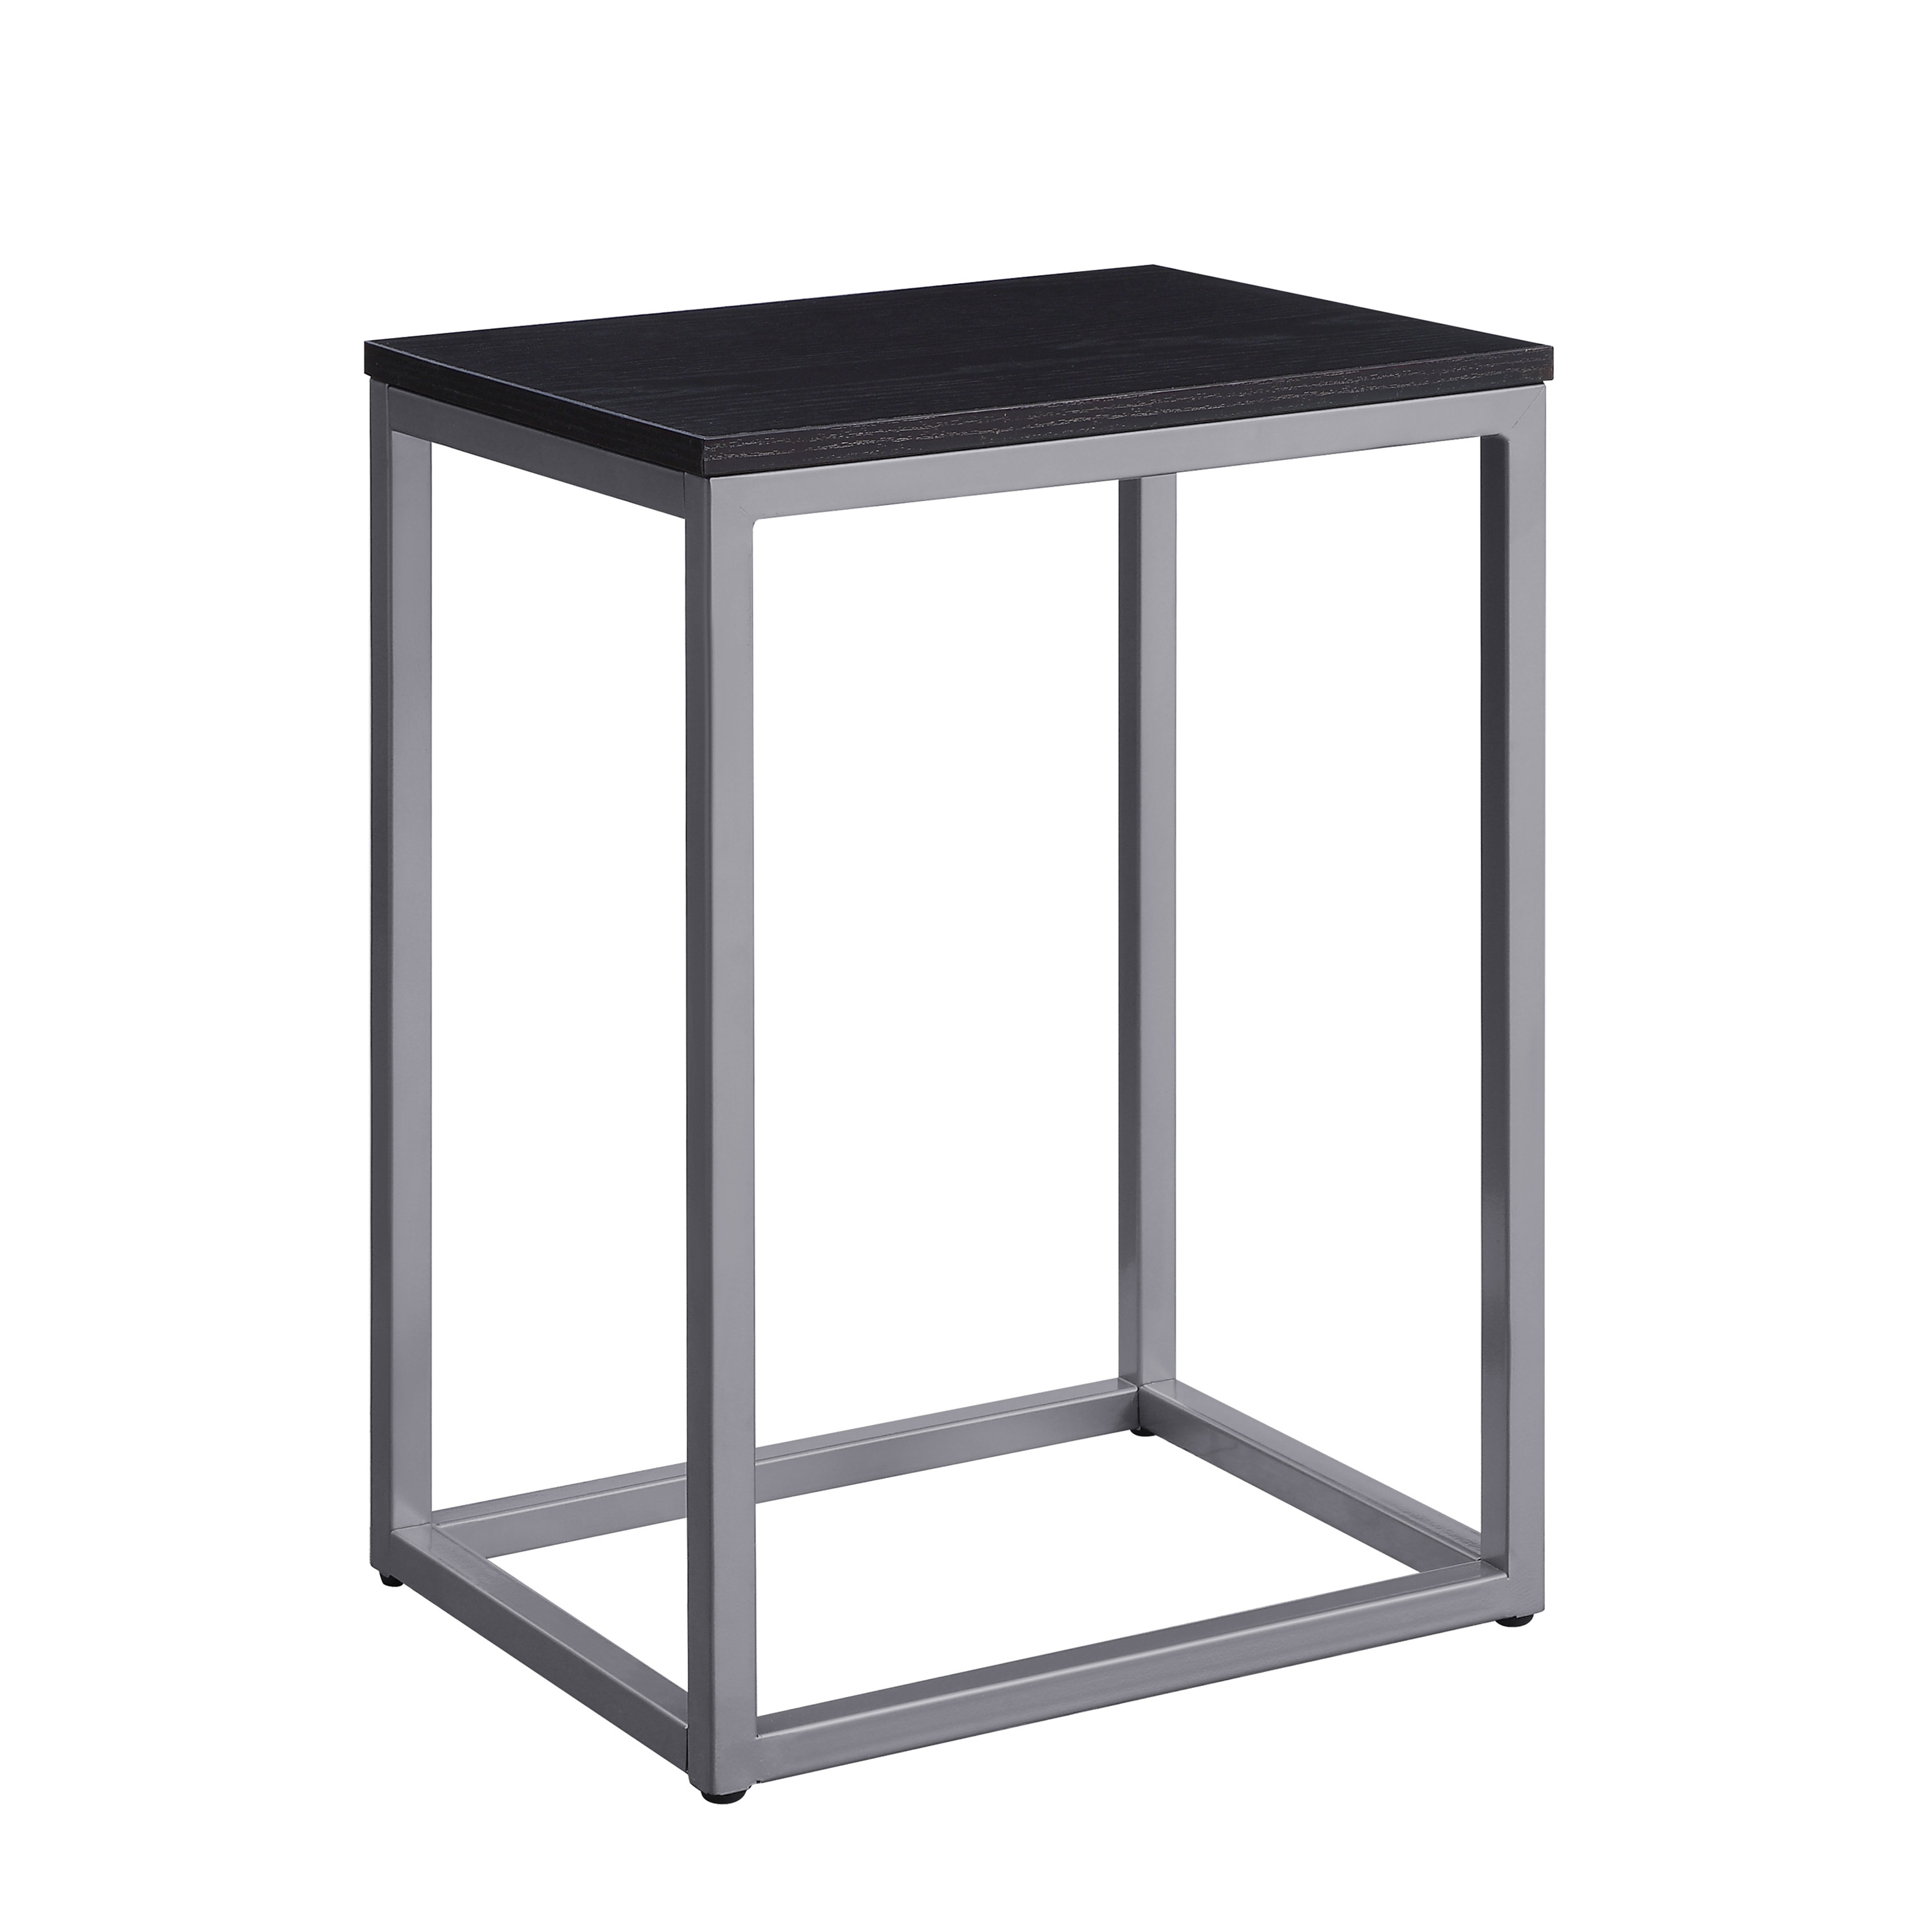 mainstays end table black marble brickseek eugene accent espresso winsome round drop leaf kitchen dale tiffany crystal lamps outdoor side extra long narrow sofa pier promo code